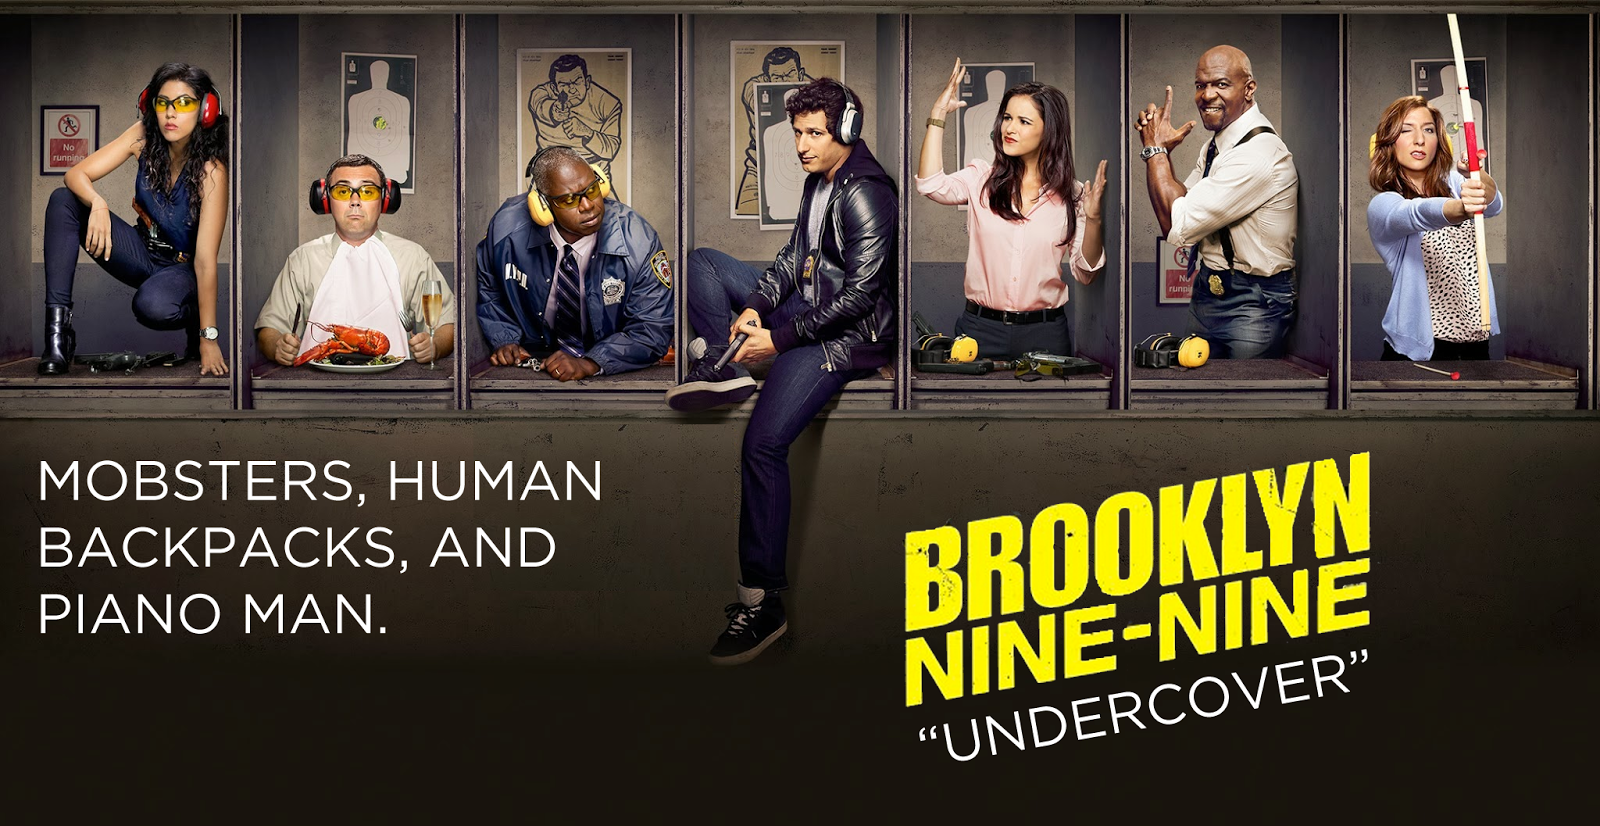 Brooklyn Nine-Nine - Episode 2.01 - Undercover - Review